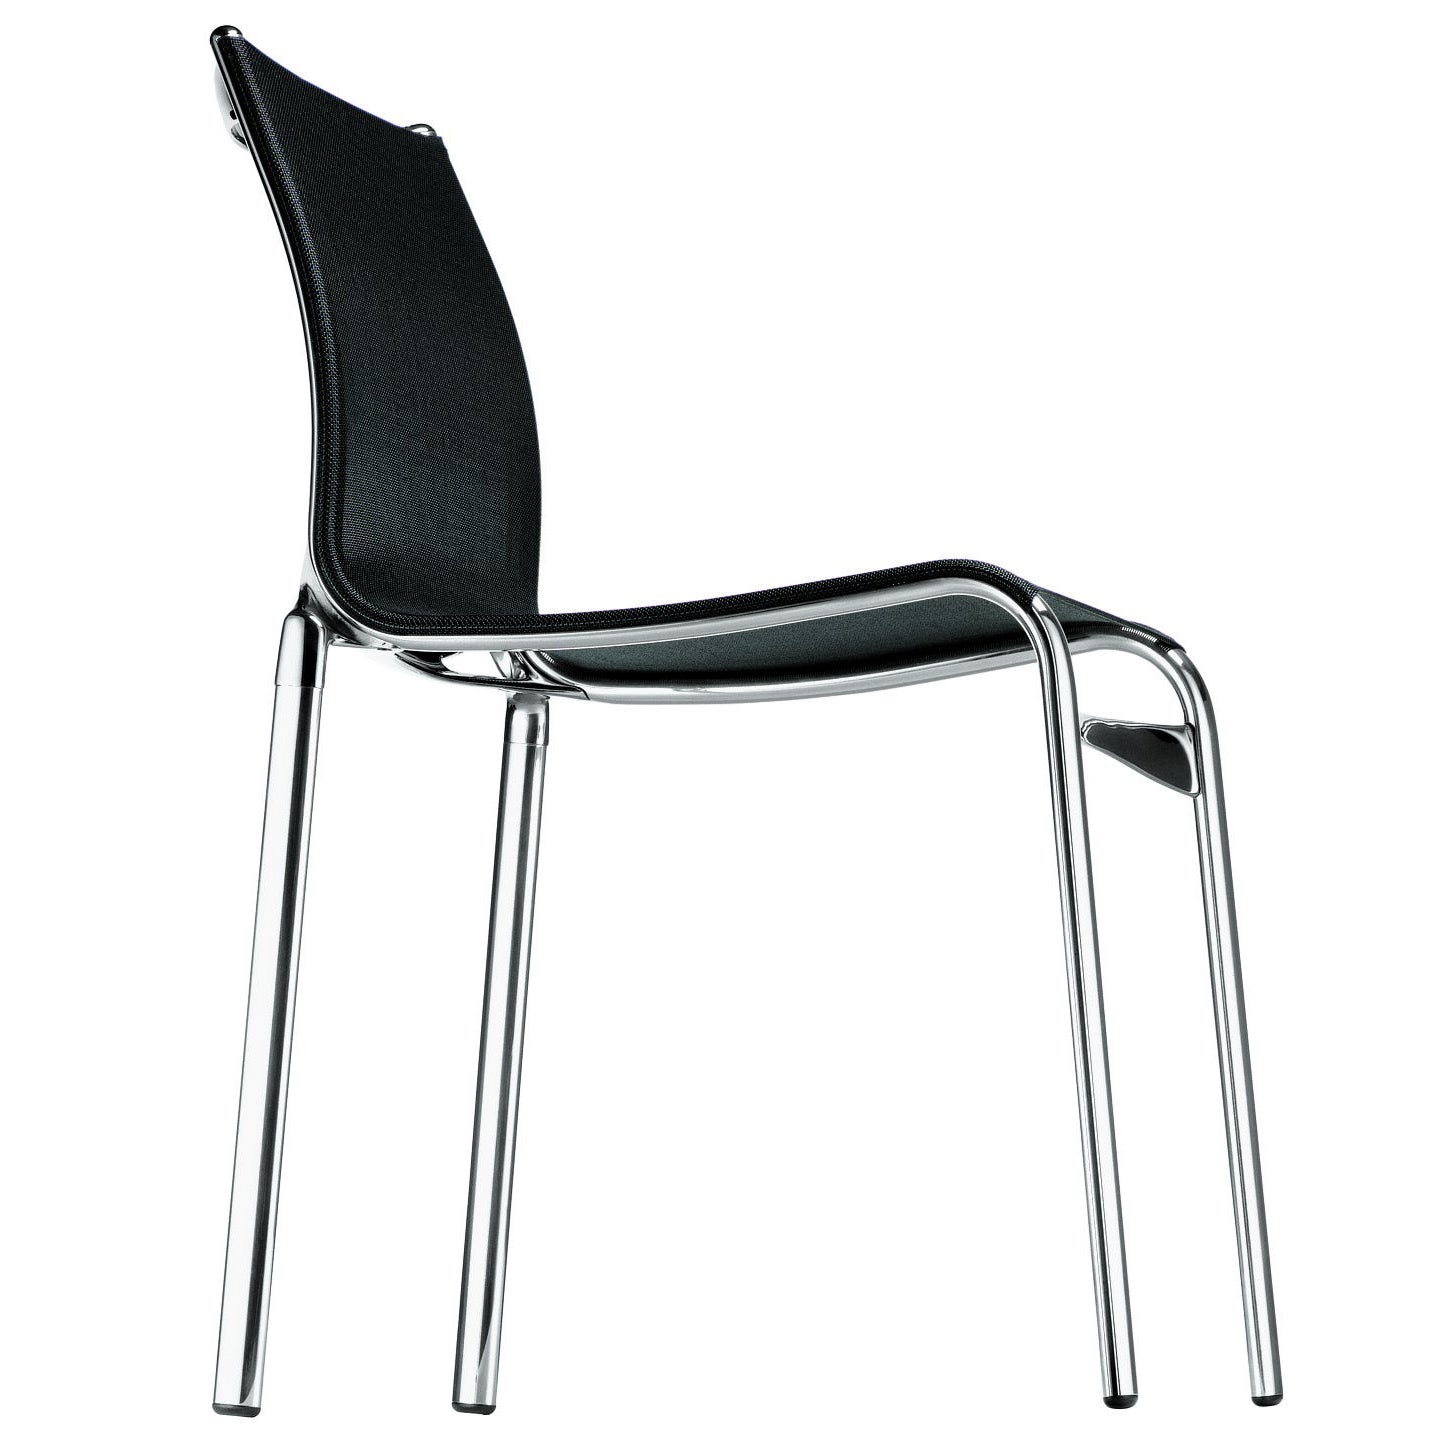 Alias Highframe 40 Chair in Black Mesh Seat with Polished Aluminium Frame